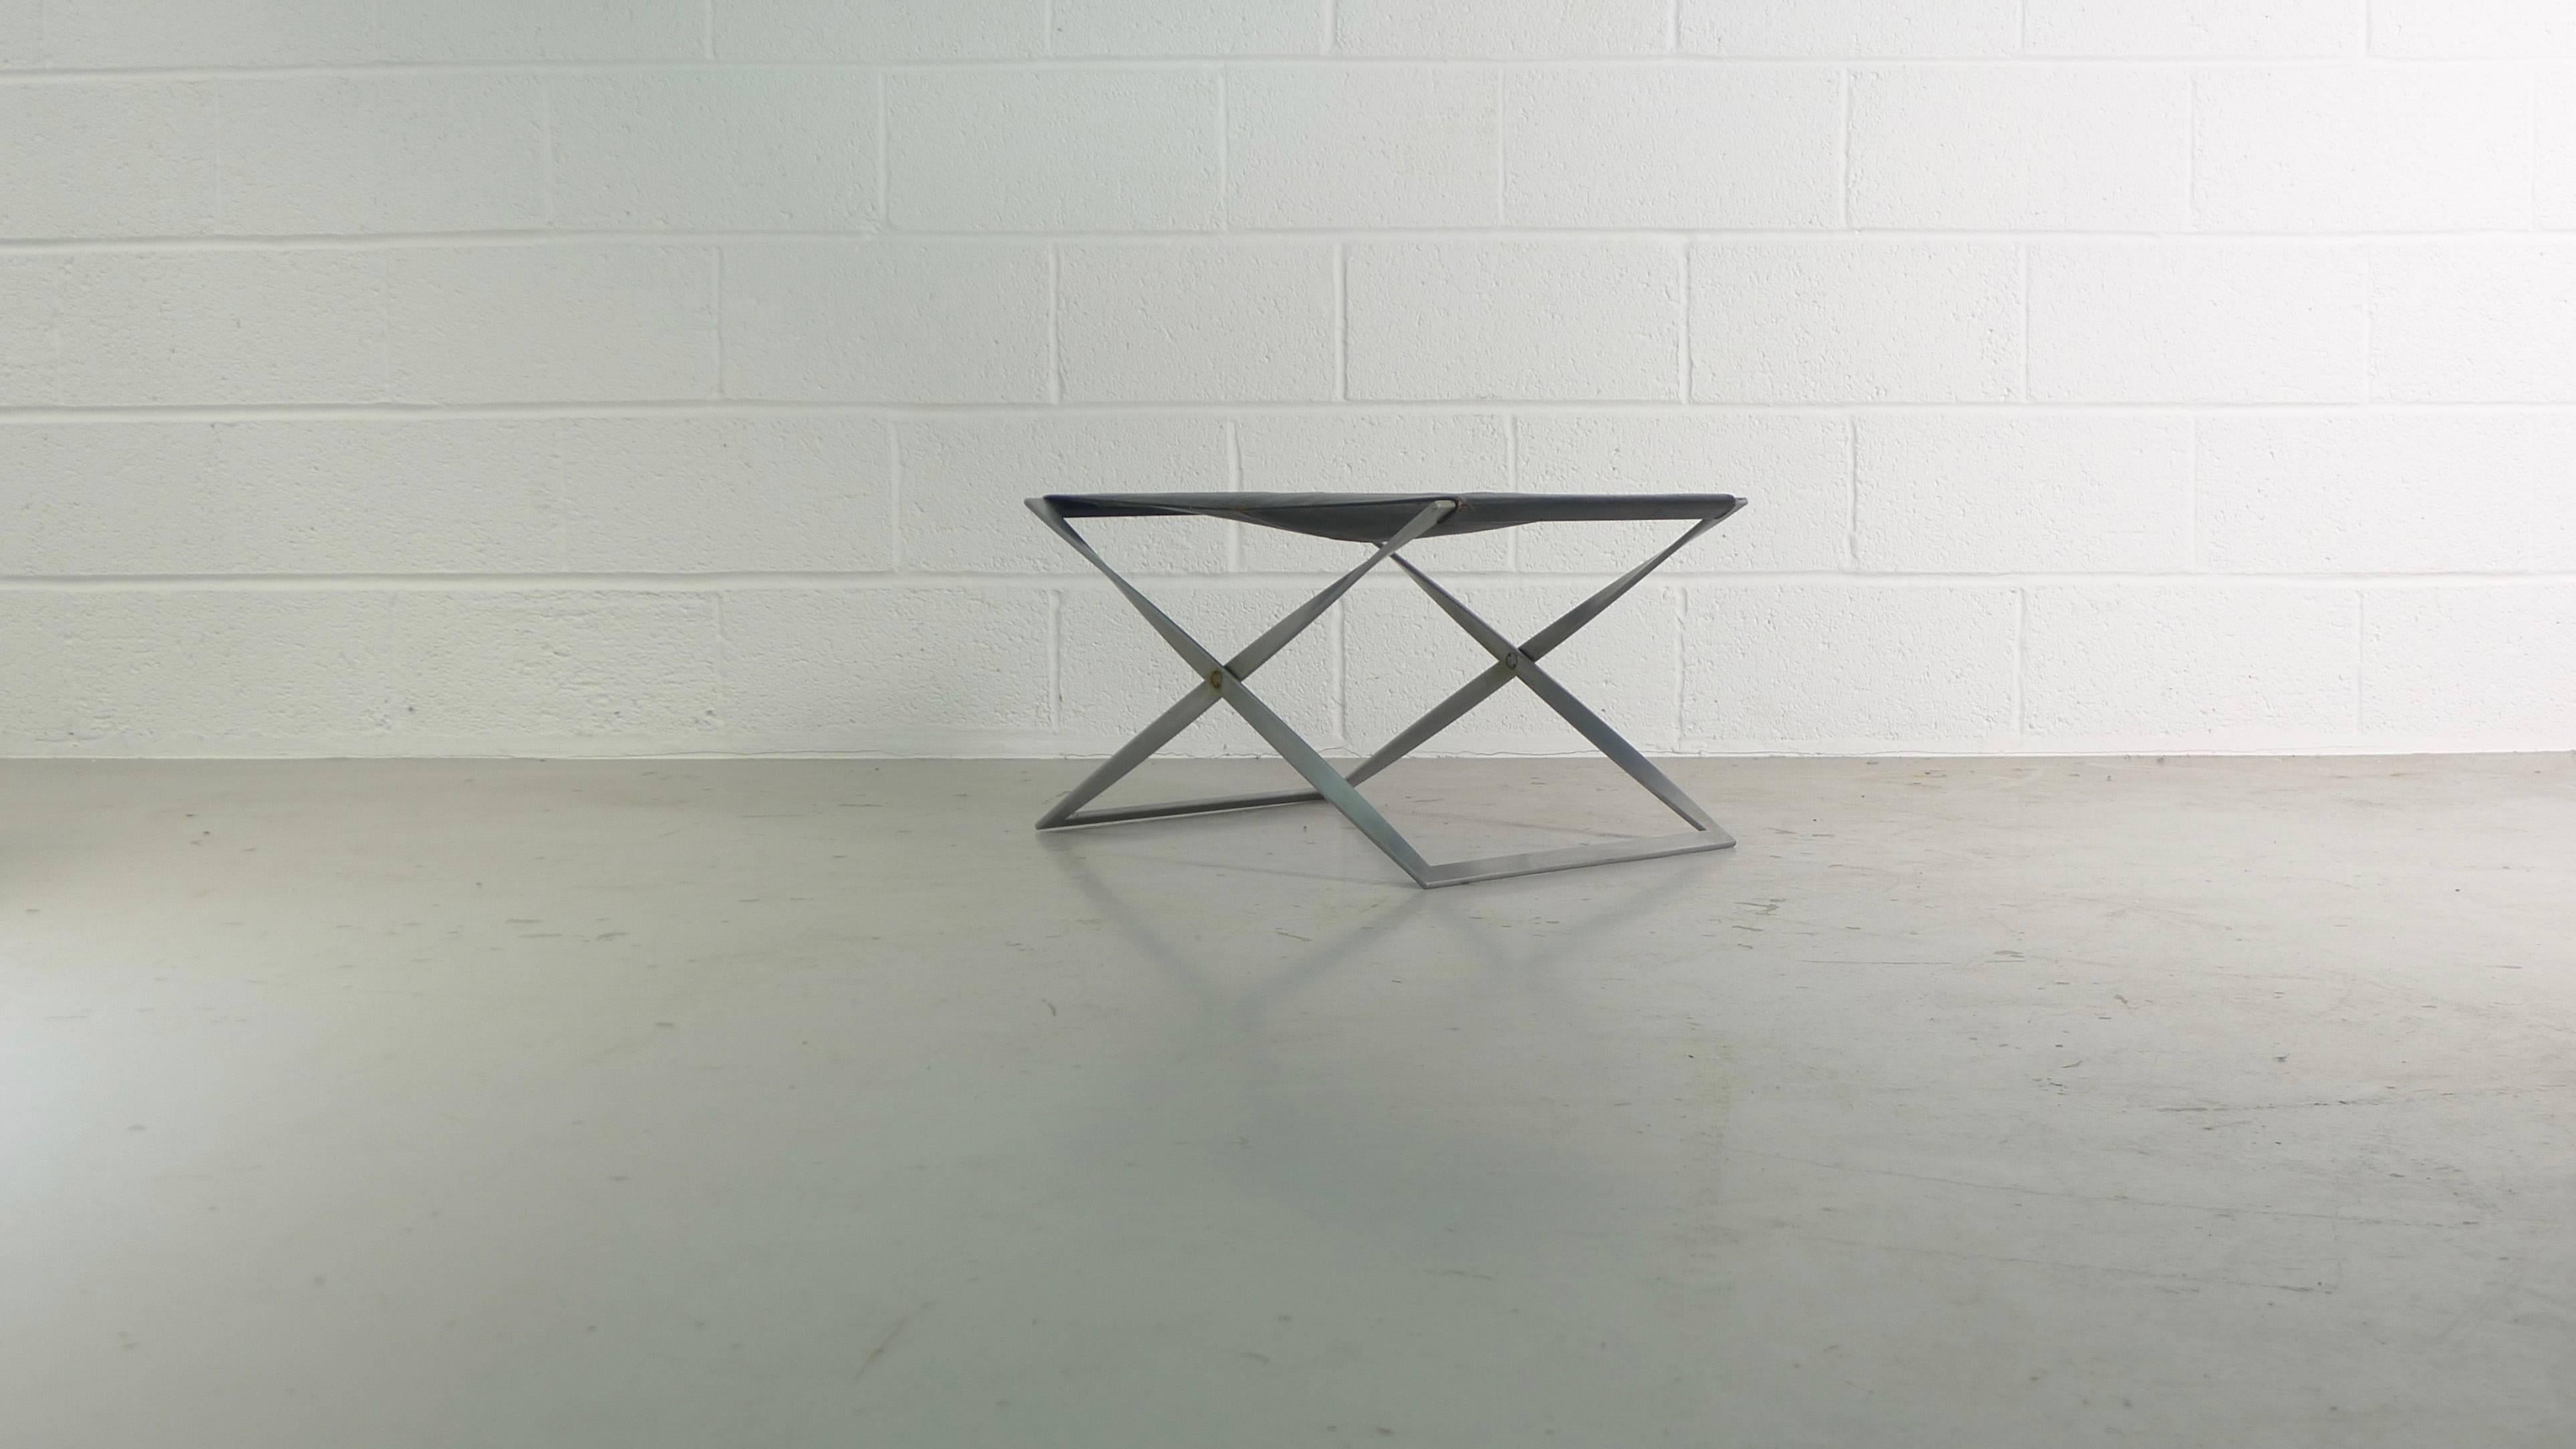 Poul Kjaerholm for E Kold Christensen, Denmark, 1961. A model PK91 folding stool of nickel-plated steel and original black leather. 

Clearly stamped by maker and in excellent vinatge condition.